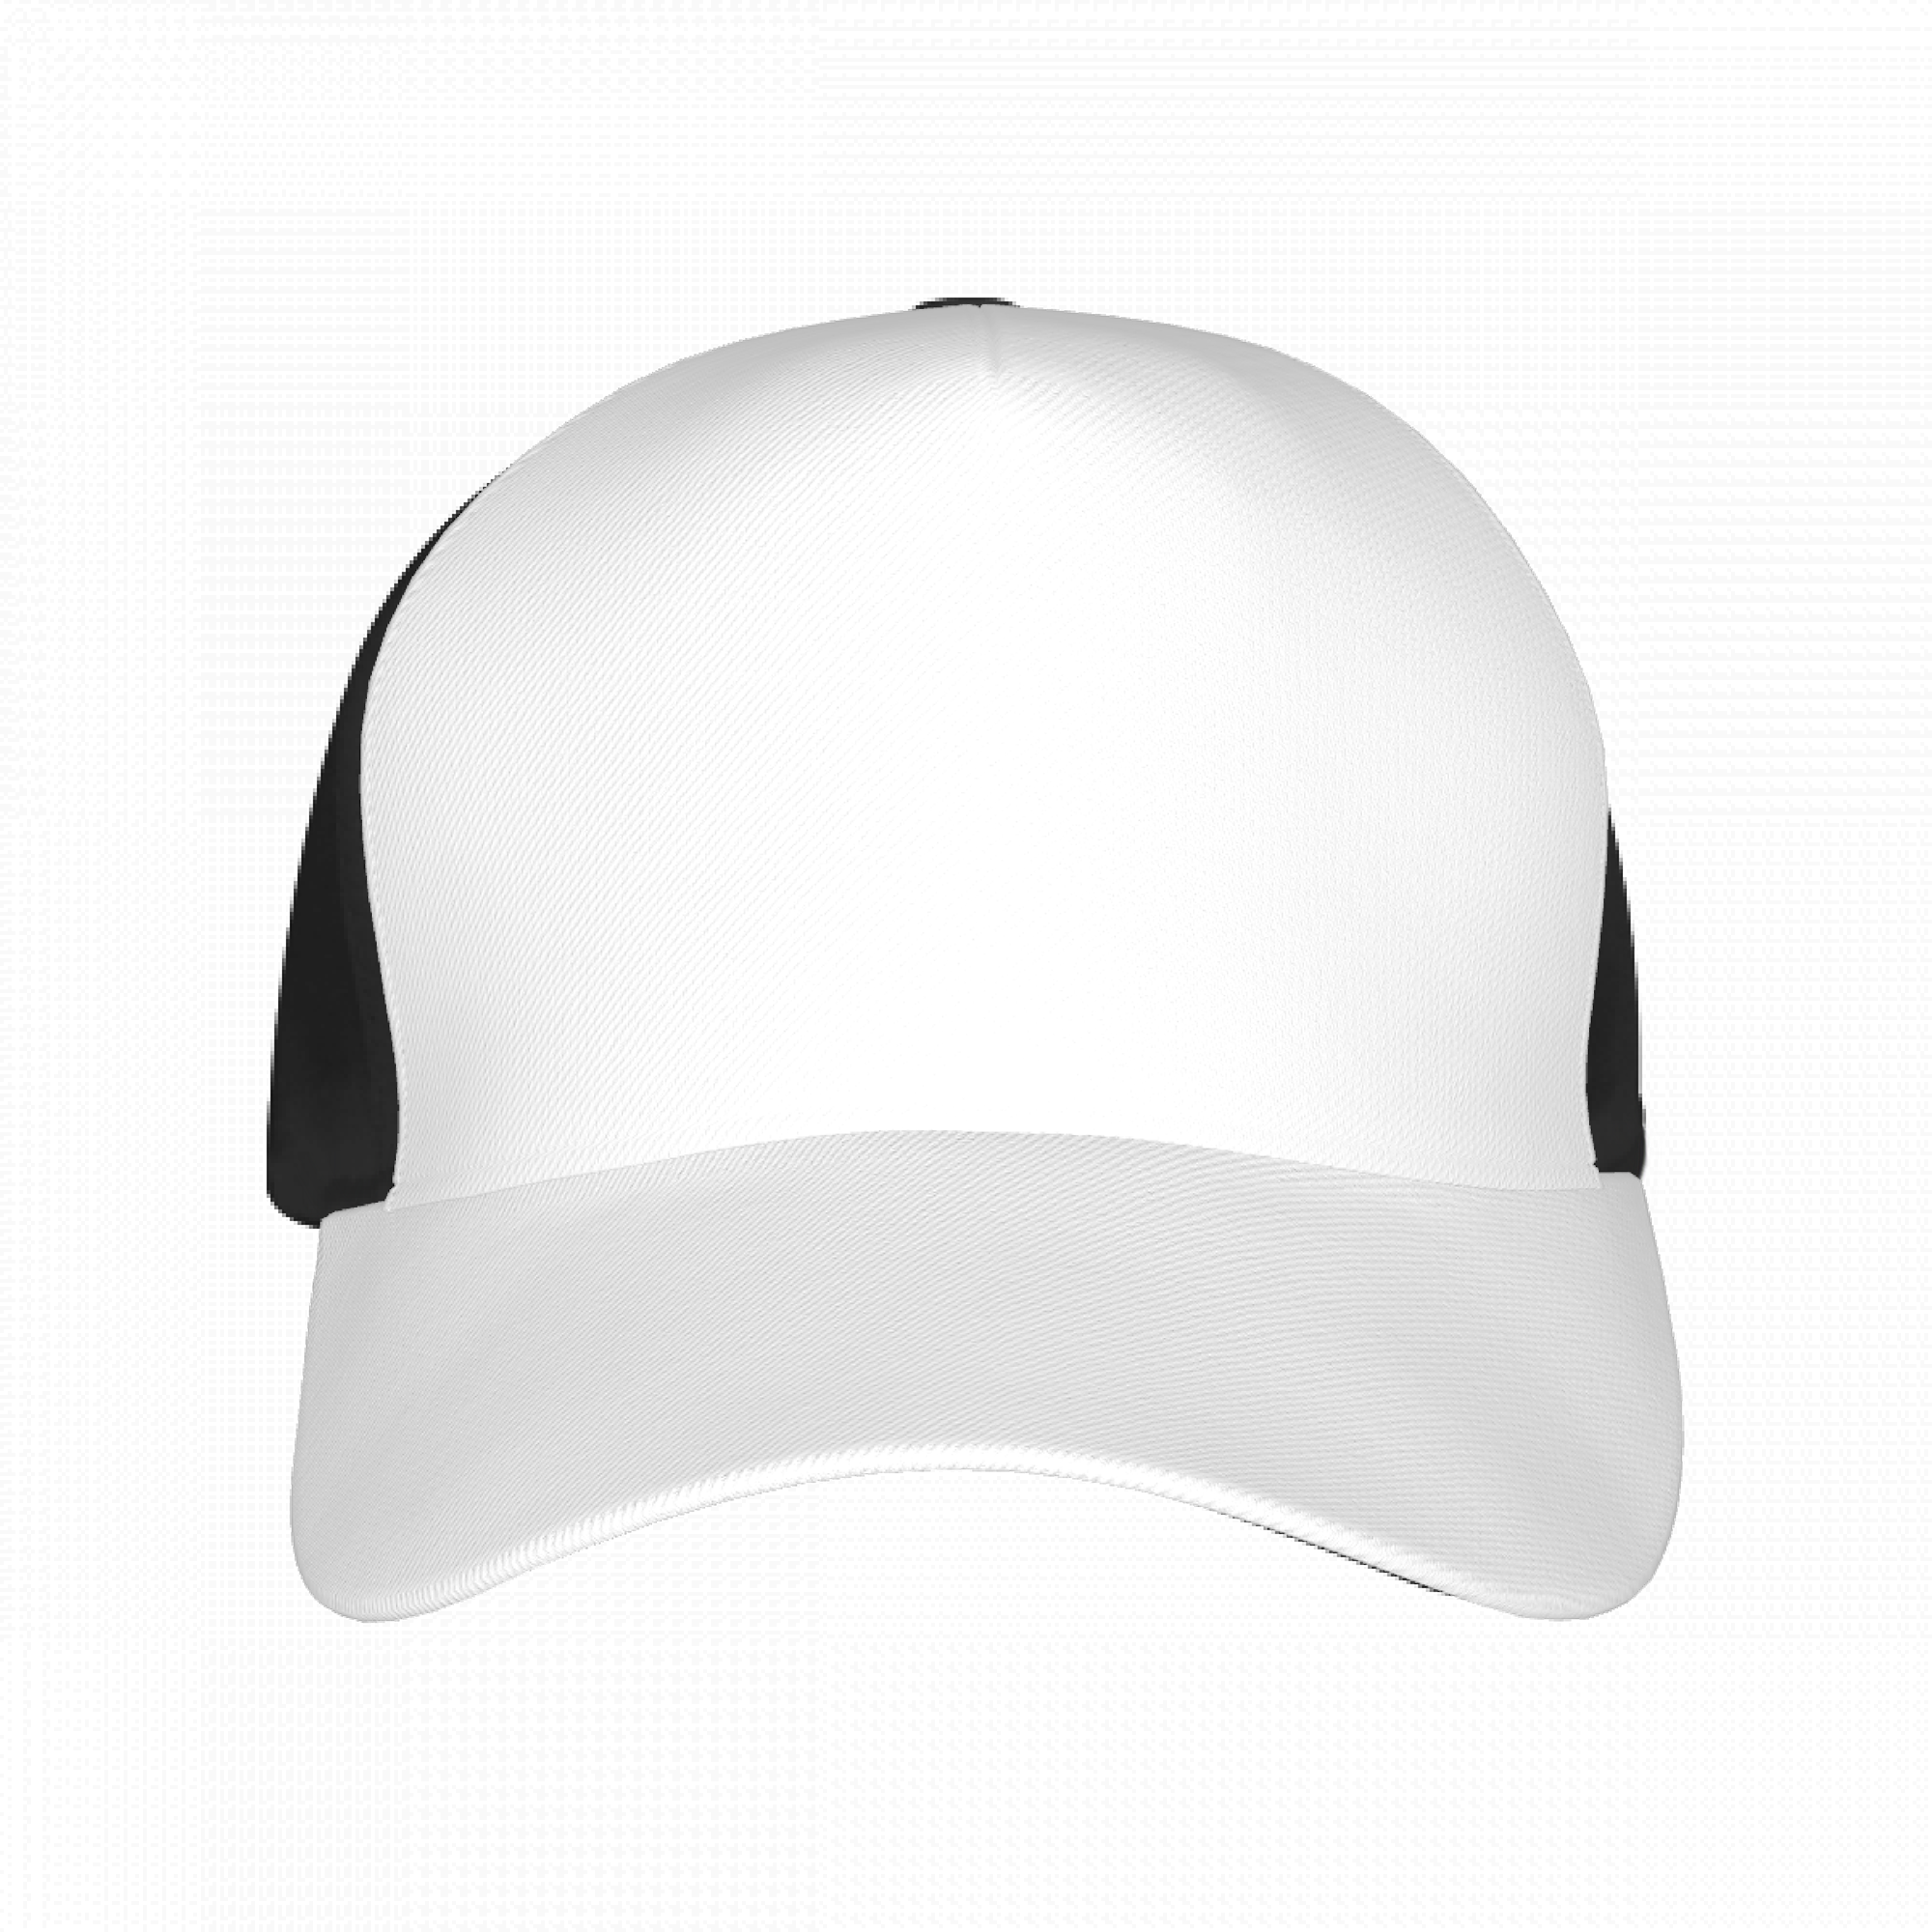 Customizable Curved Brim Baseball Cap (with Black color)